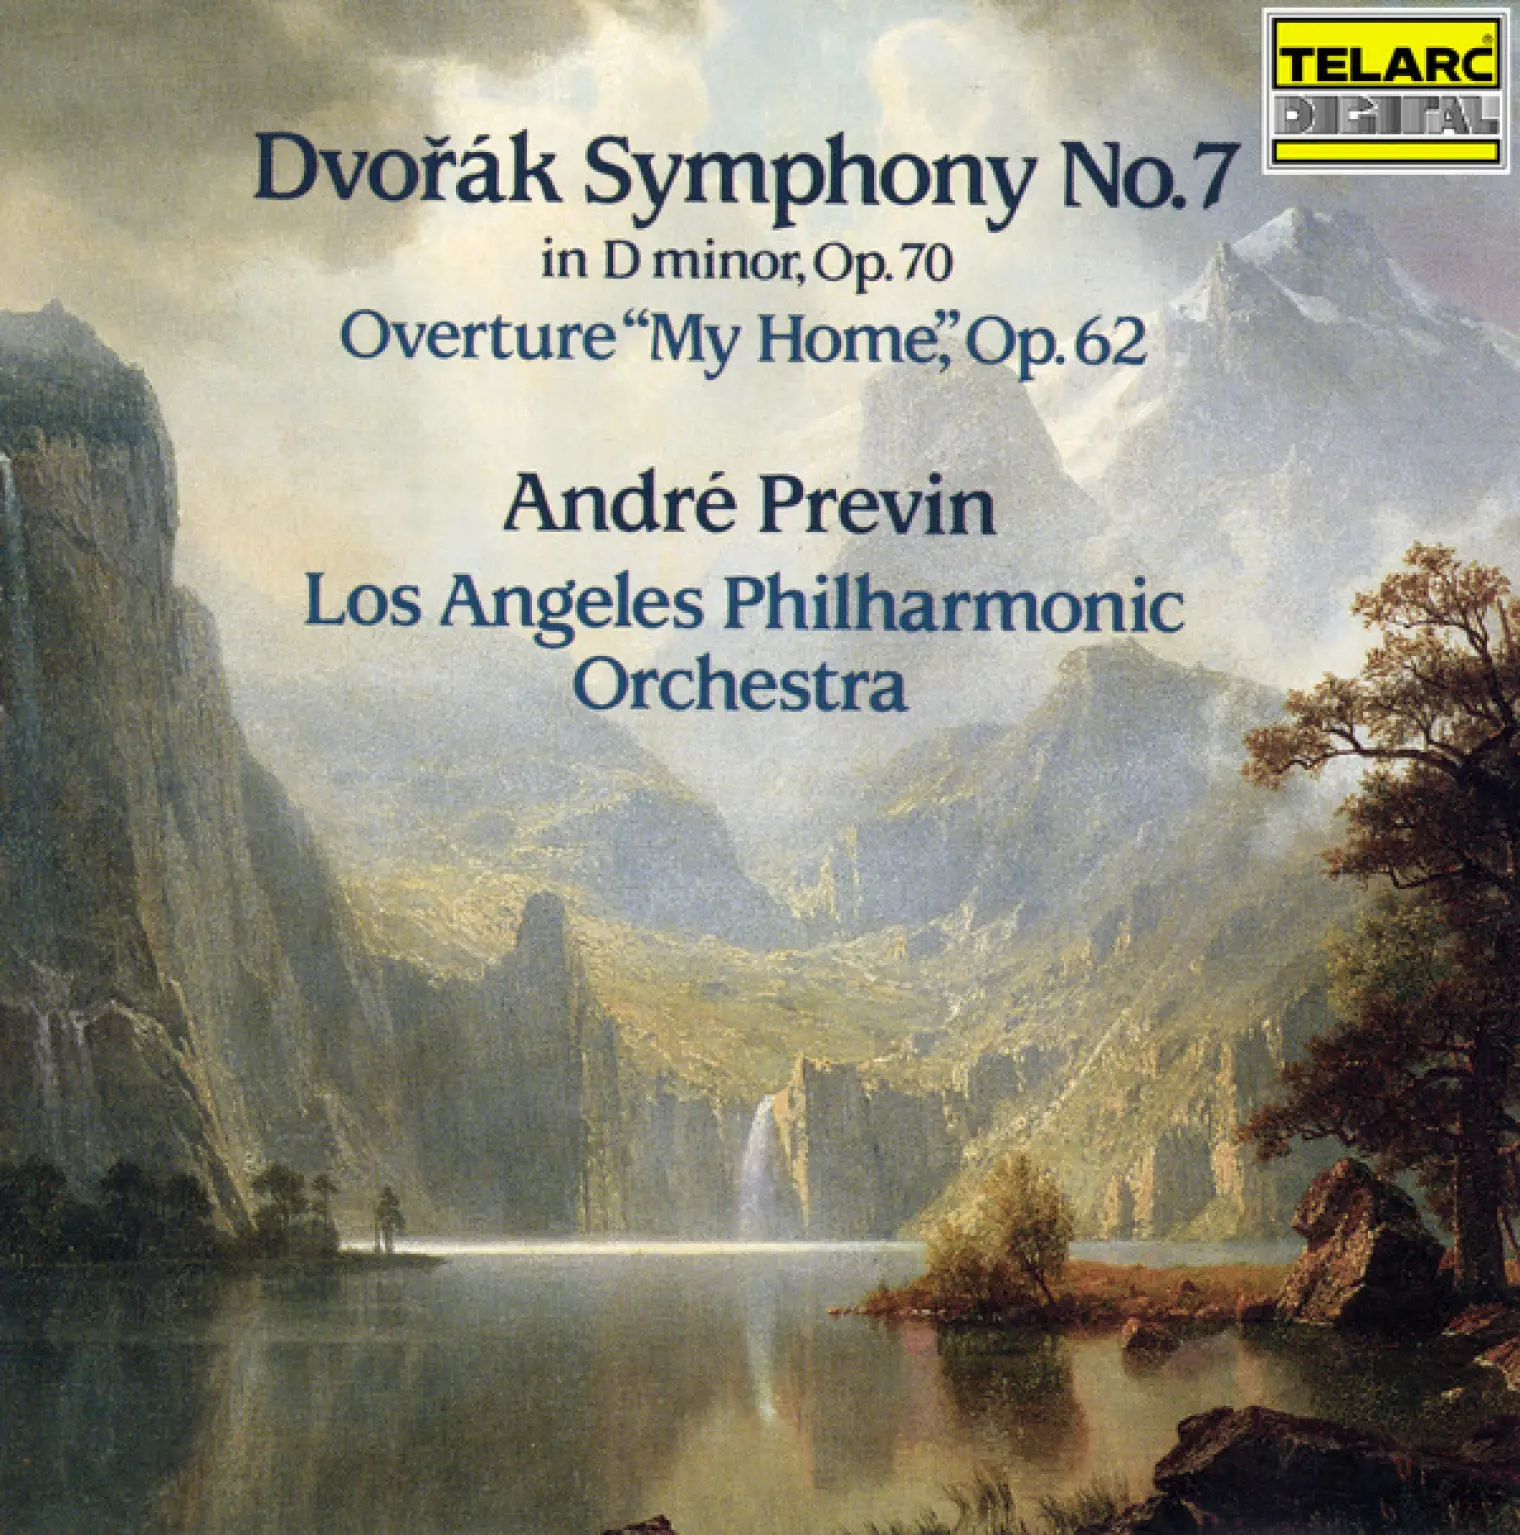 Dvořák: Symphony No. 7 in D Minor, Op. 70, B. 141 & Overture, Op. 62, B. 125a "My Home" -  André Previn 